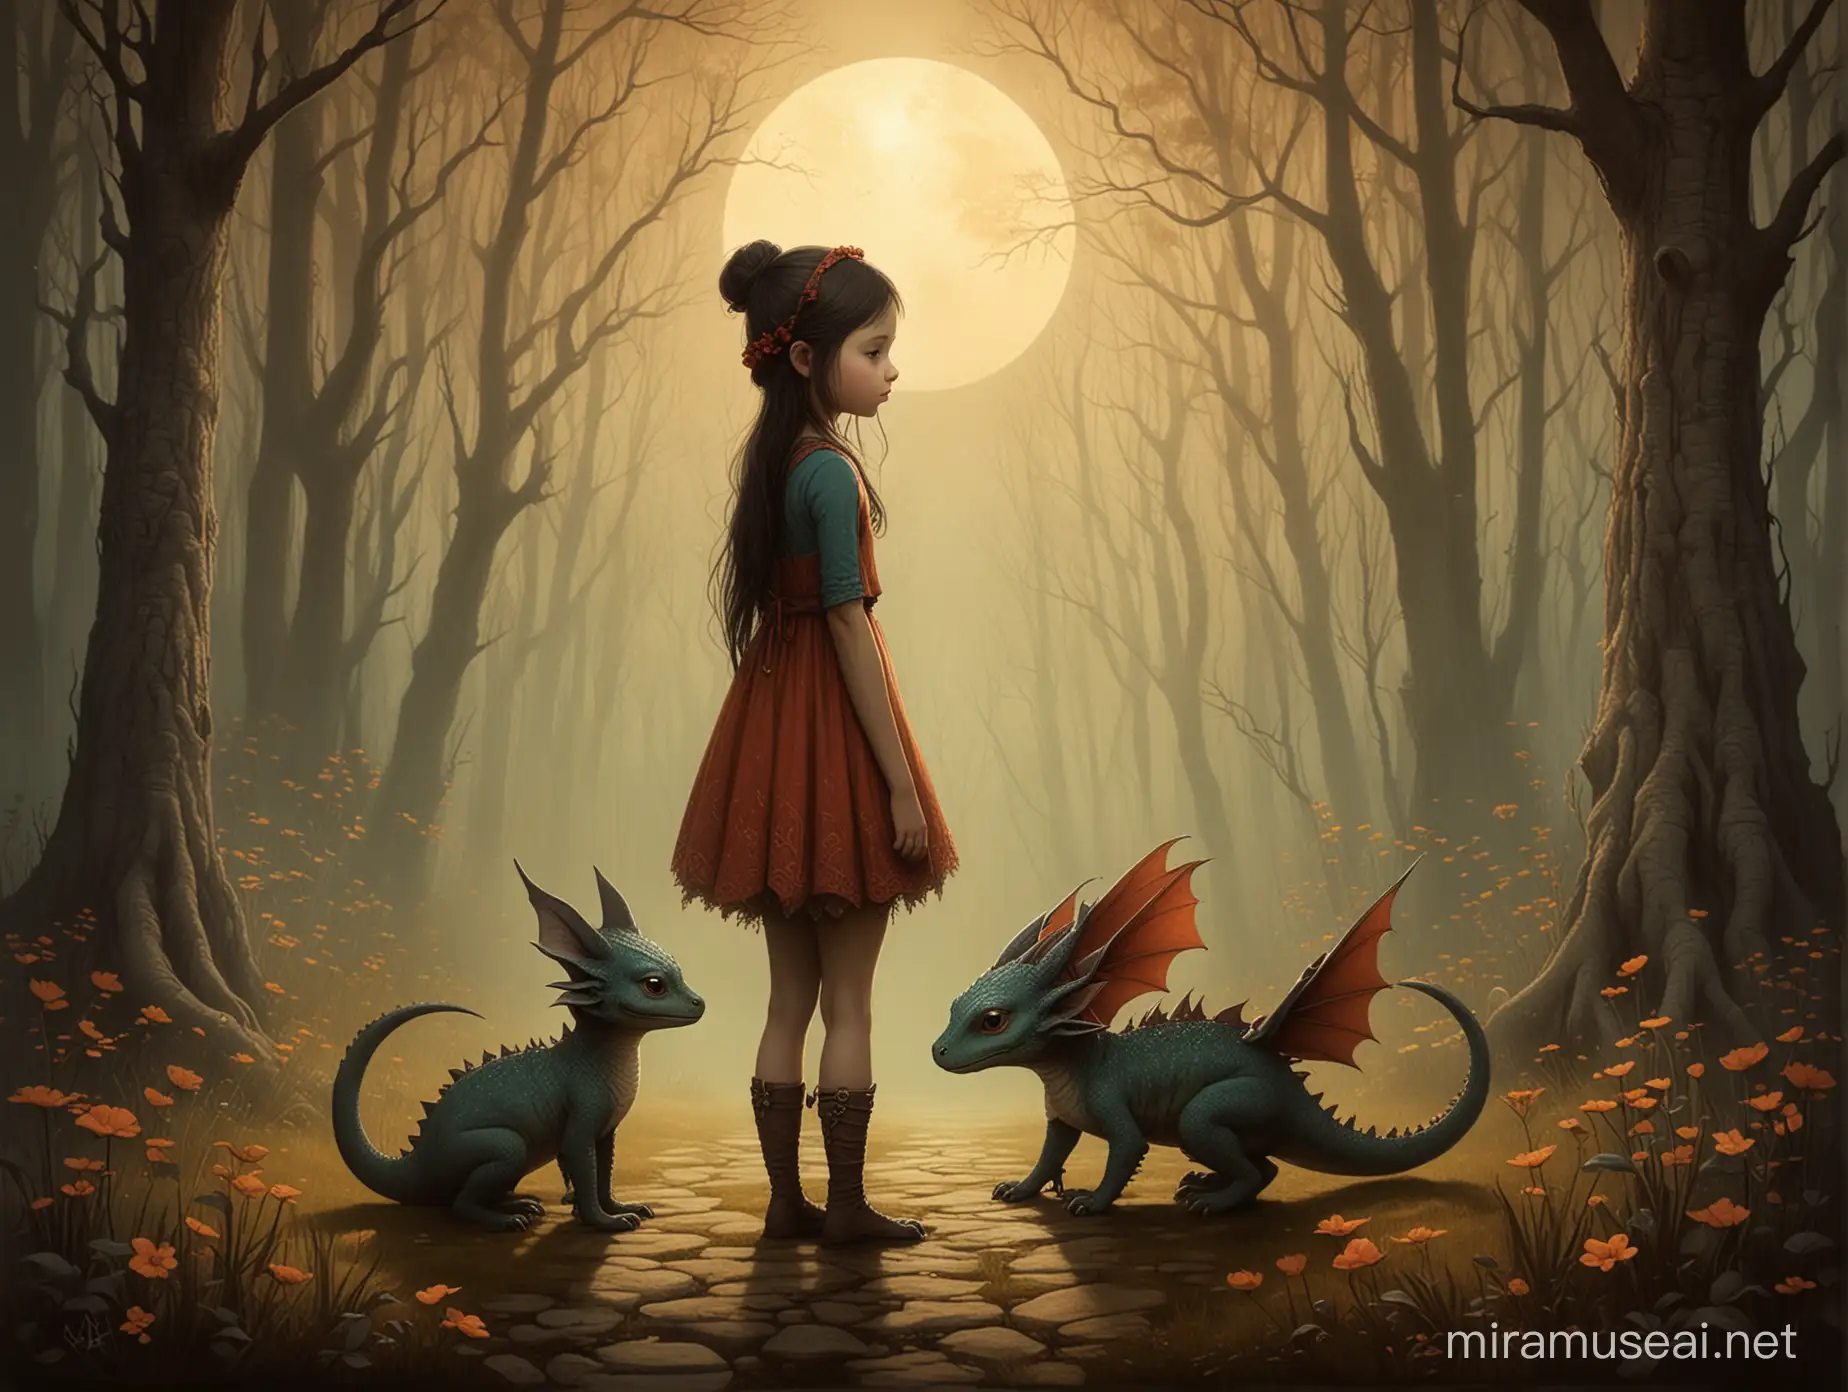 Young Girl with a Playful Dragon in Whimsical Andy Kehoe Style